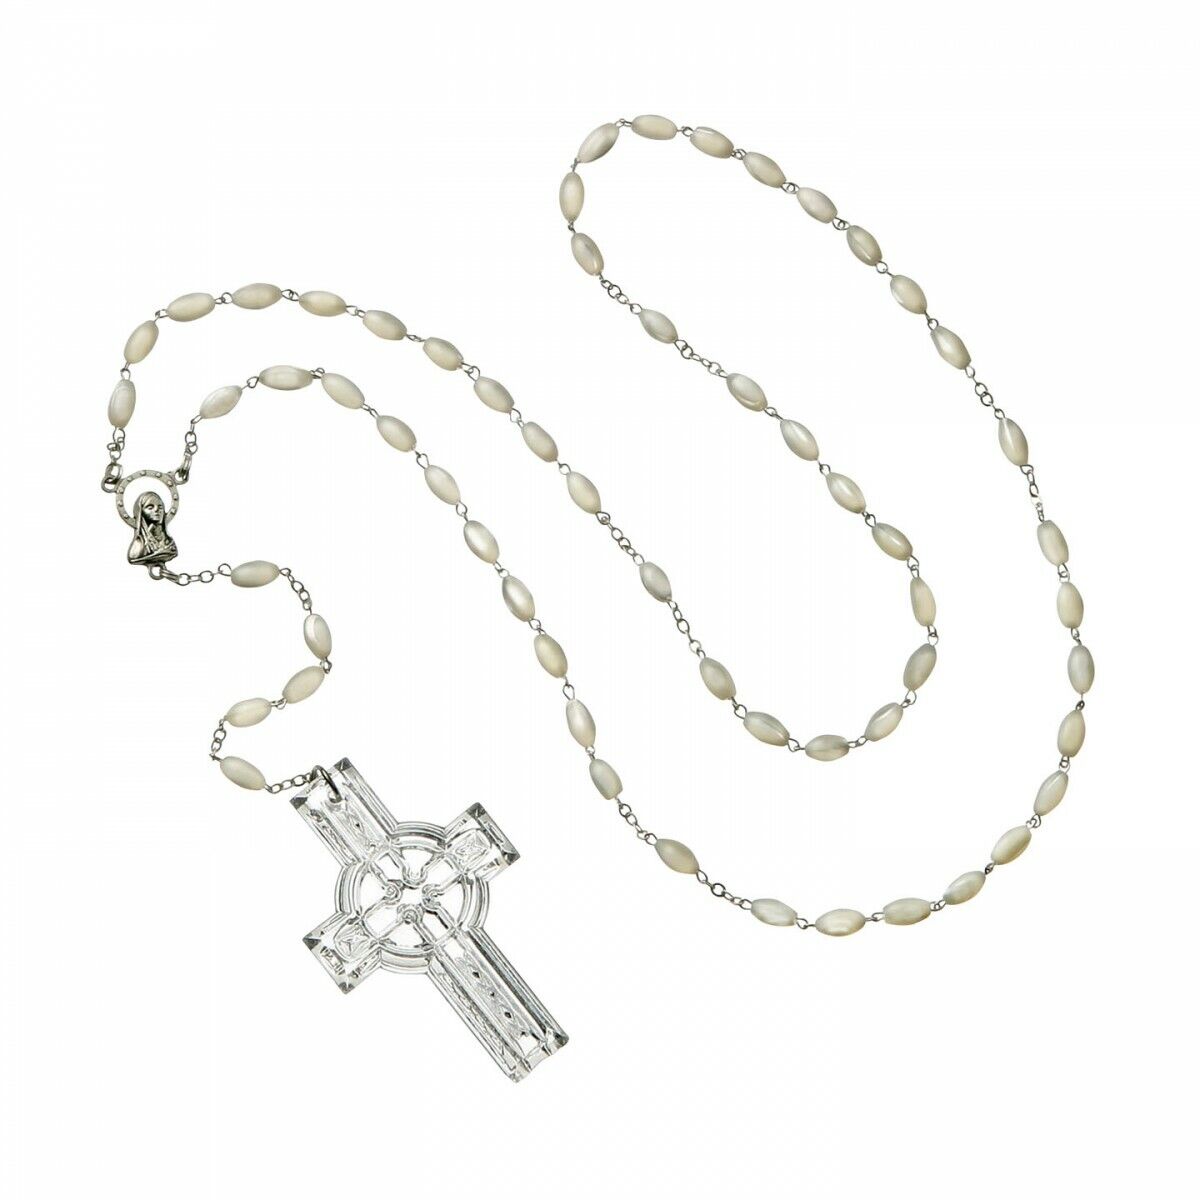  Waterford Celtic Rosary Beads with Crystal Cross # 135580 Religious Necklace 